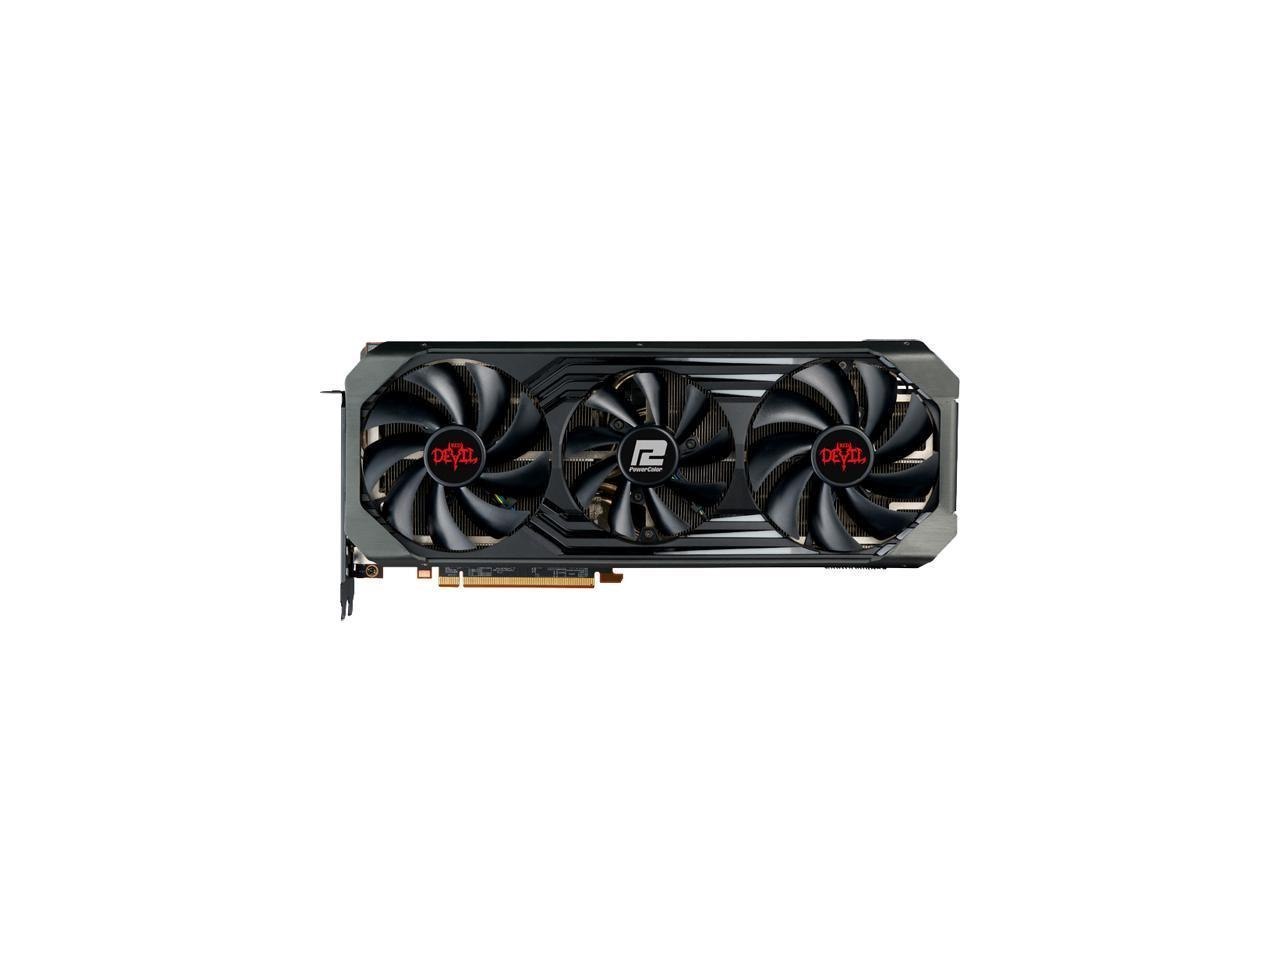 PowerColor Red Devil Amd Radeon RX 6800 XT Gaming Graphics Card With 16GB GDDR6 Memory